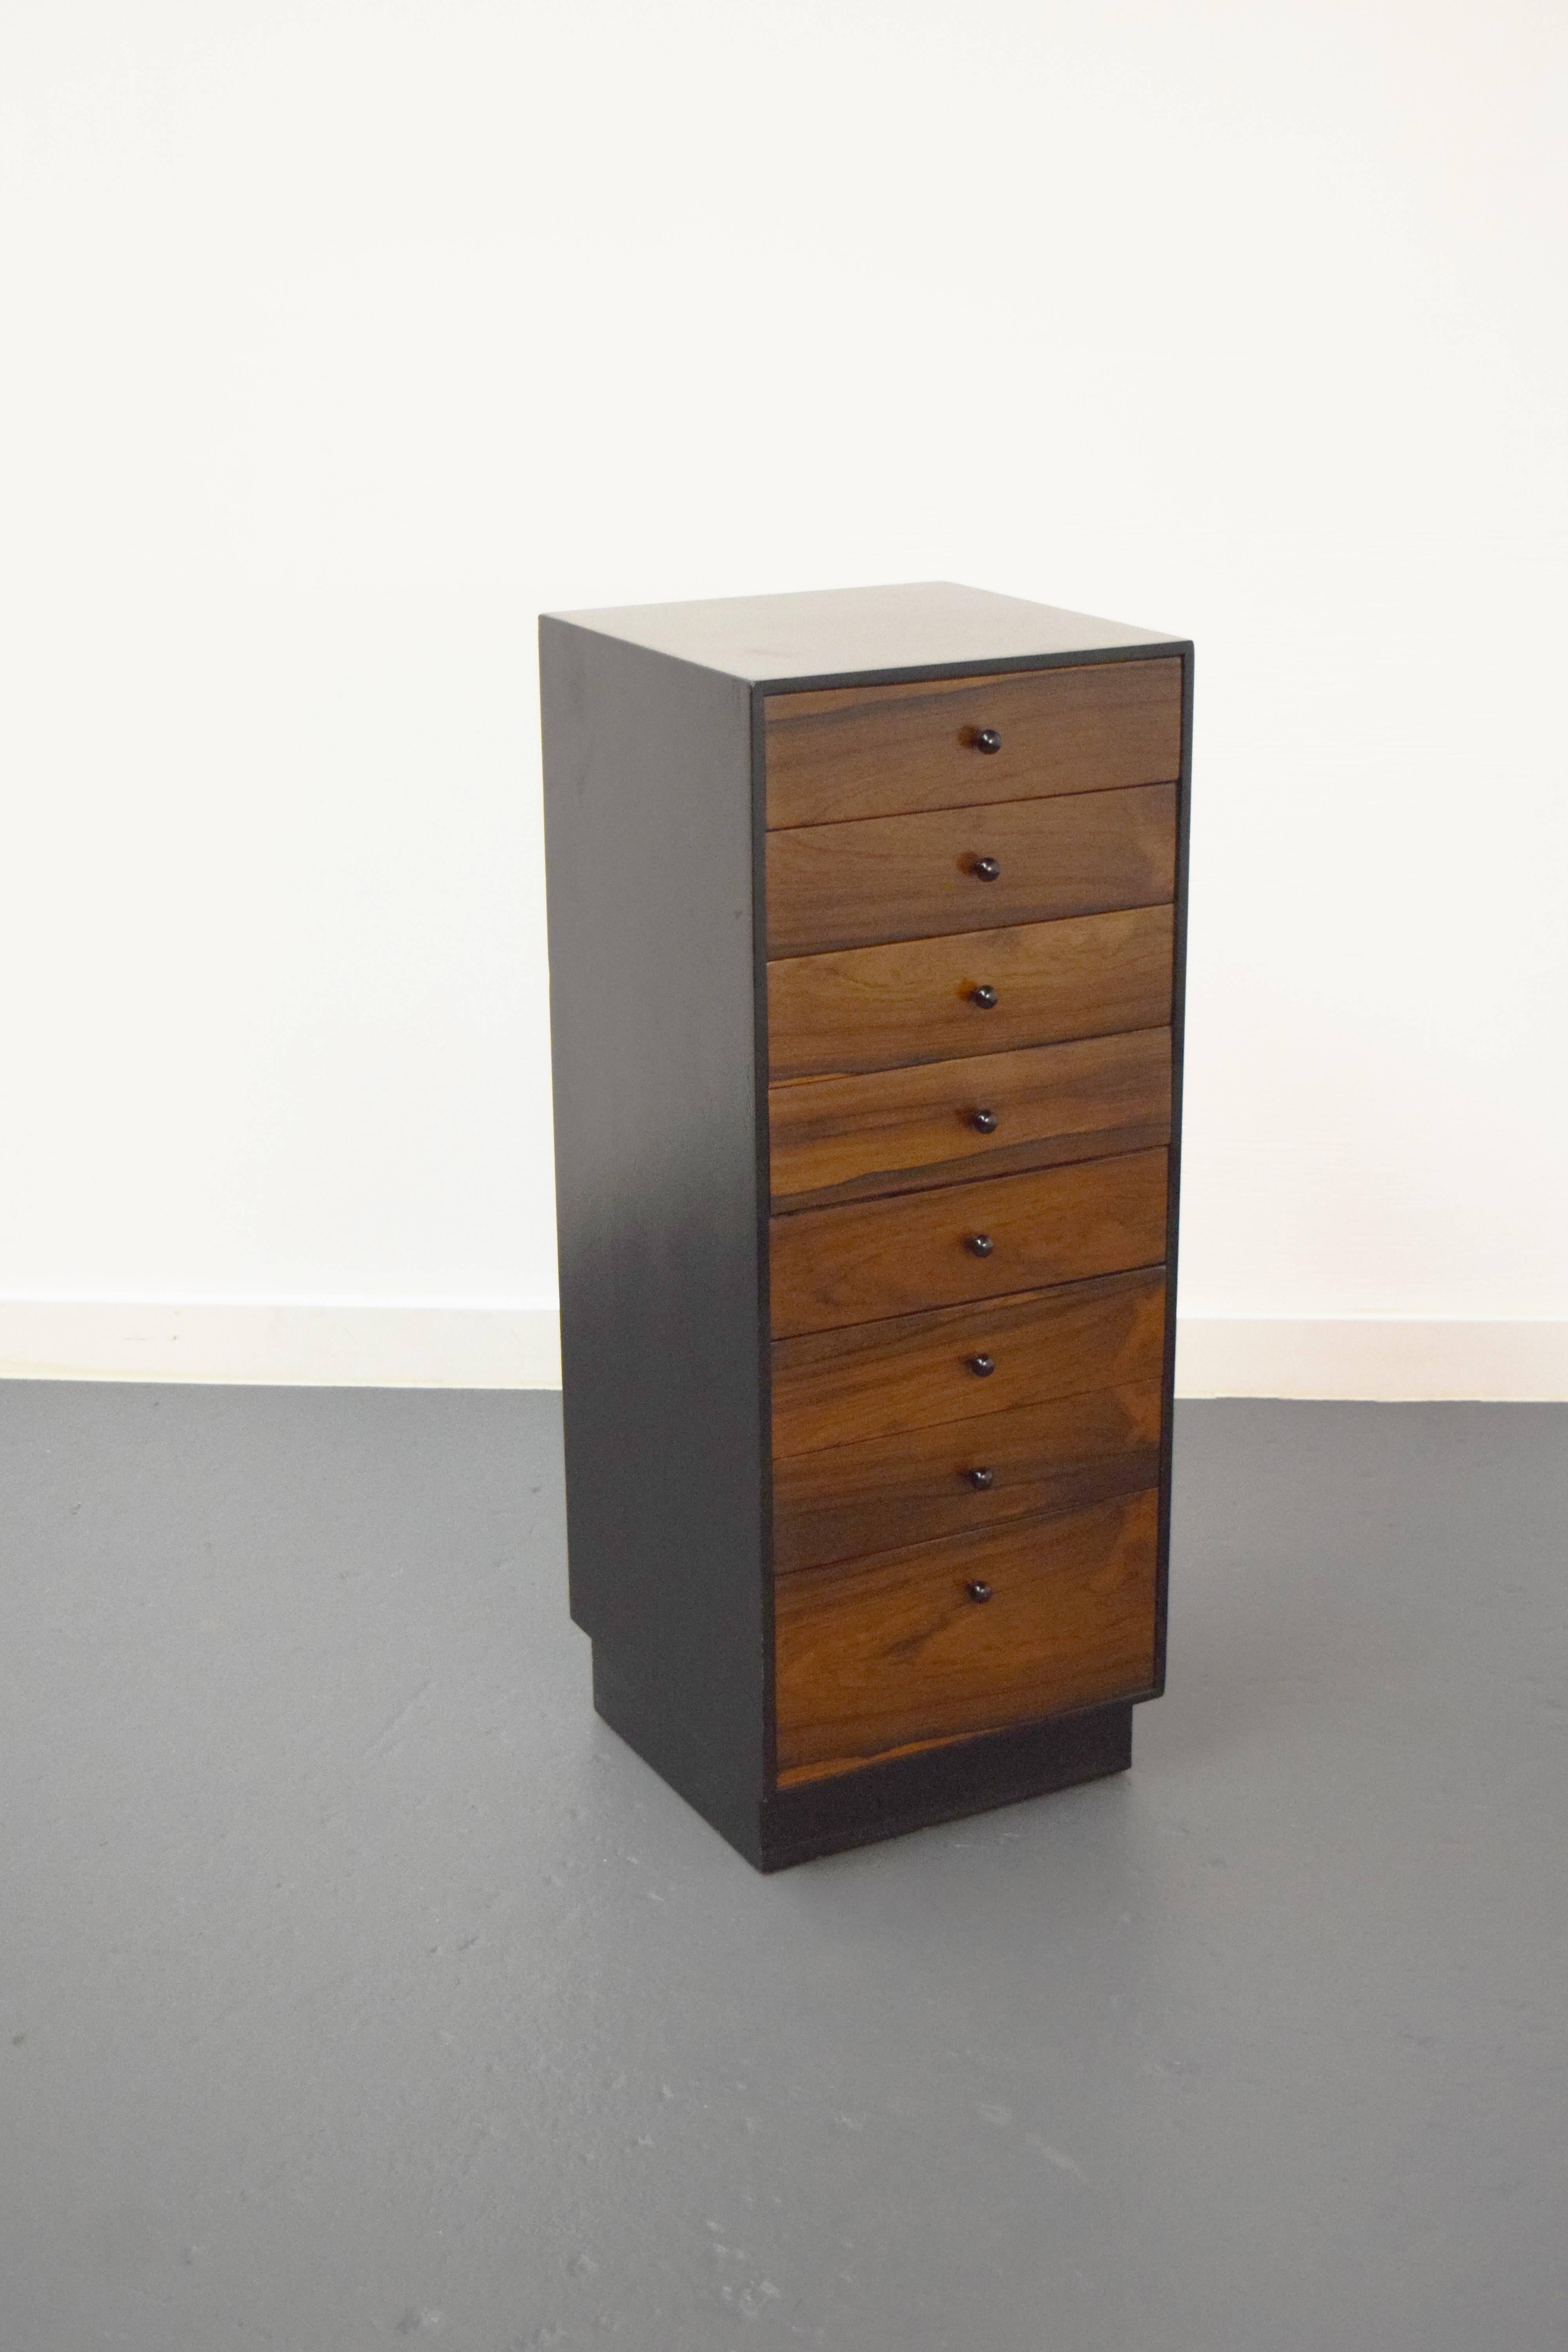 Eight-drawer rosewood jewelry cabinet by Harvey Probber.